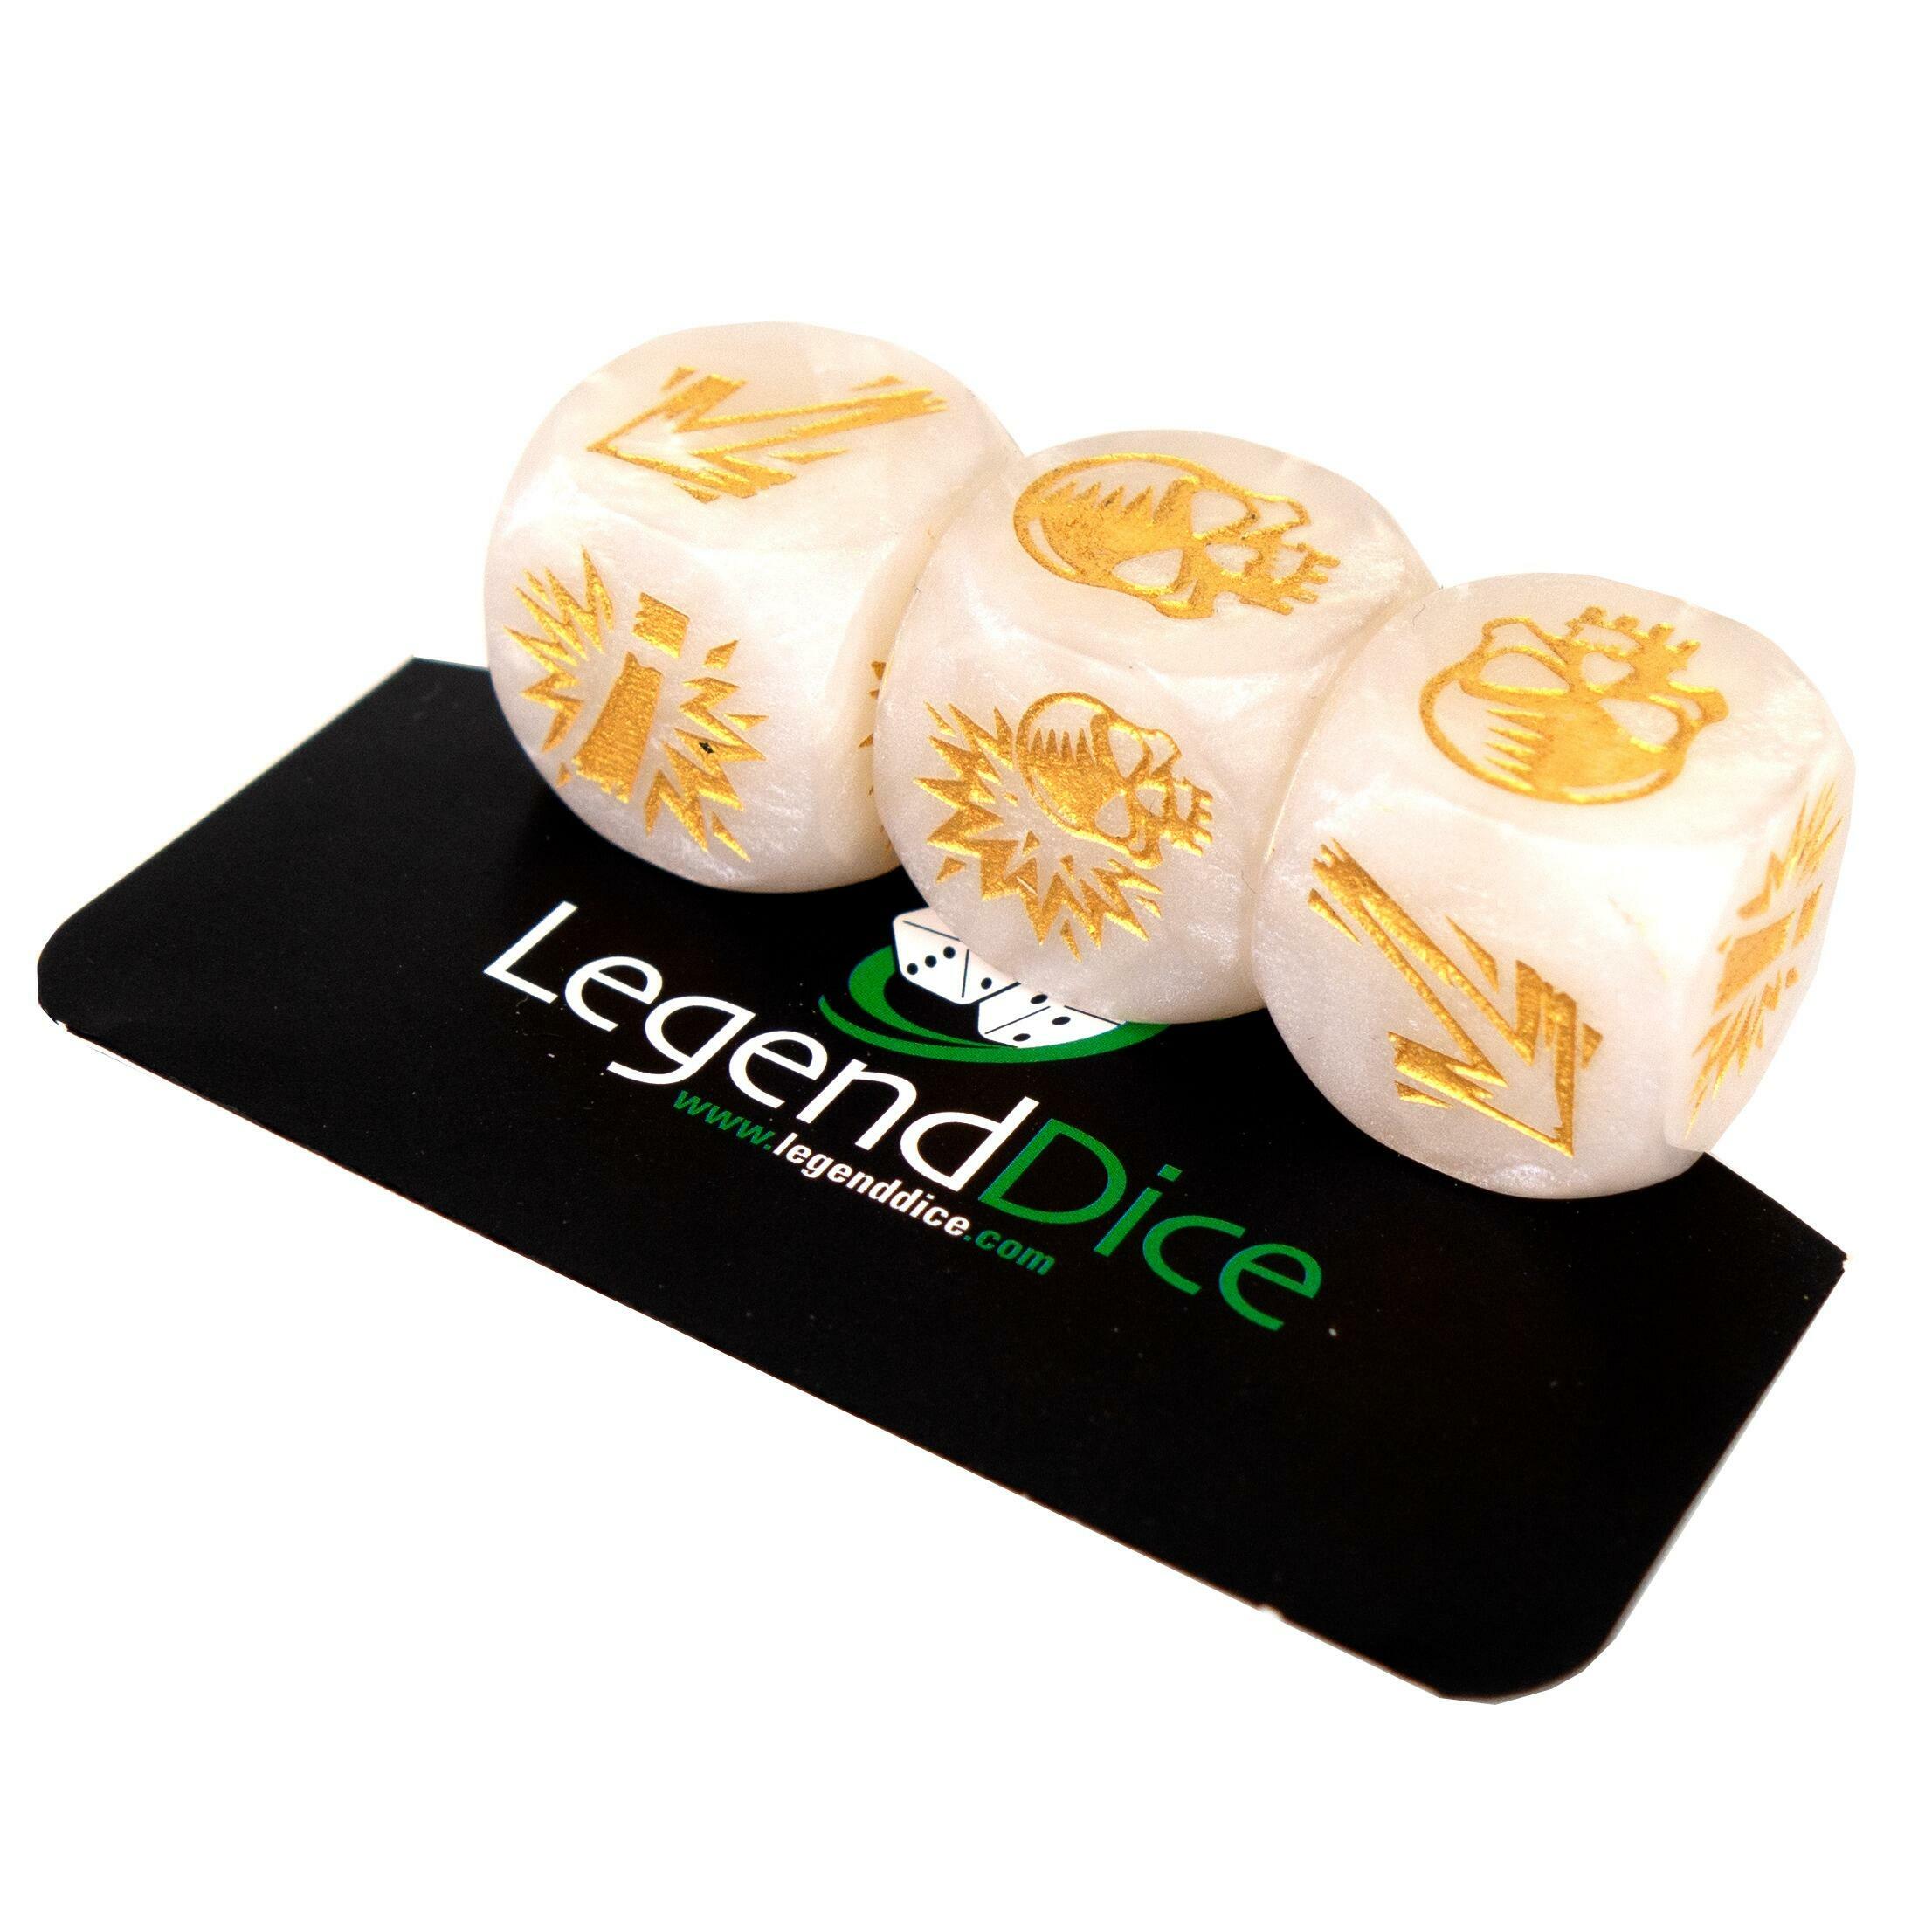 Picture of Blocking Dice Set - Pearl White (Gold) with bag